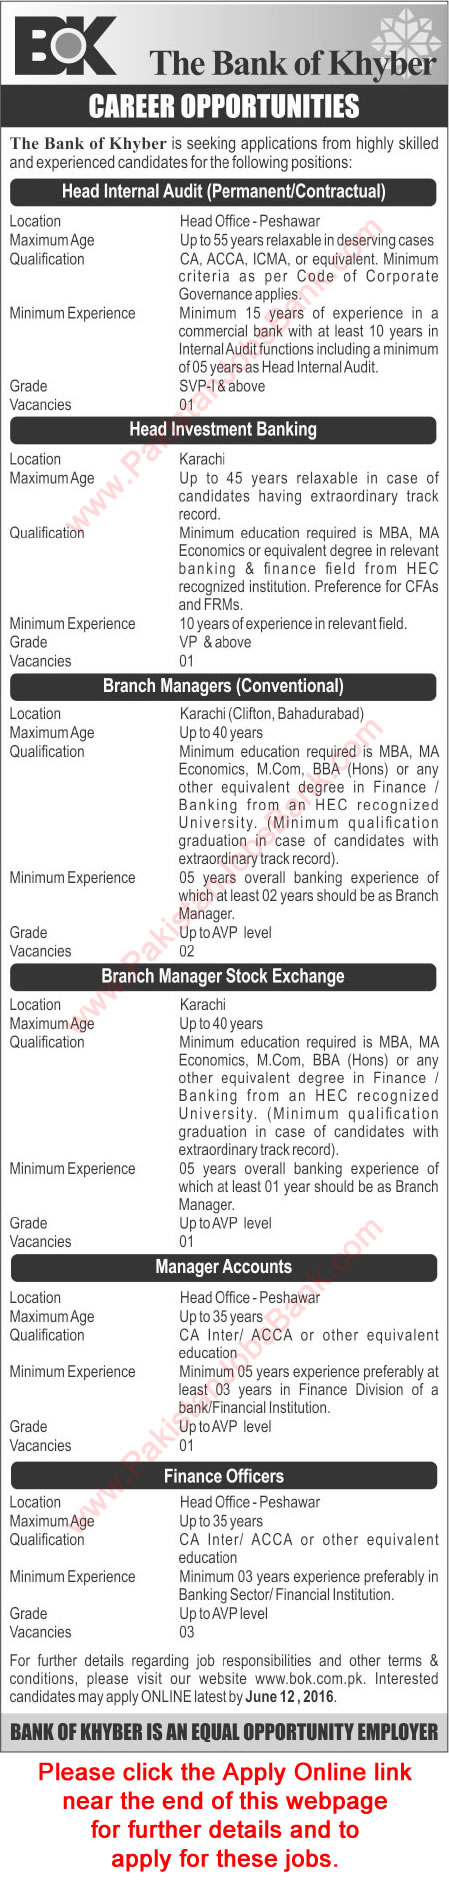 Bank of Khyber Jobs May 2016 June BOK Apply Online Finance Officers, Managers & Others Latest